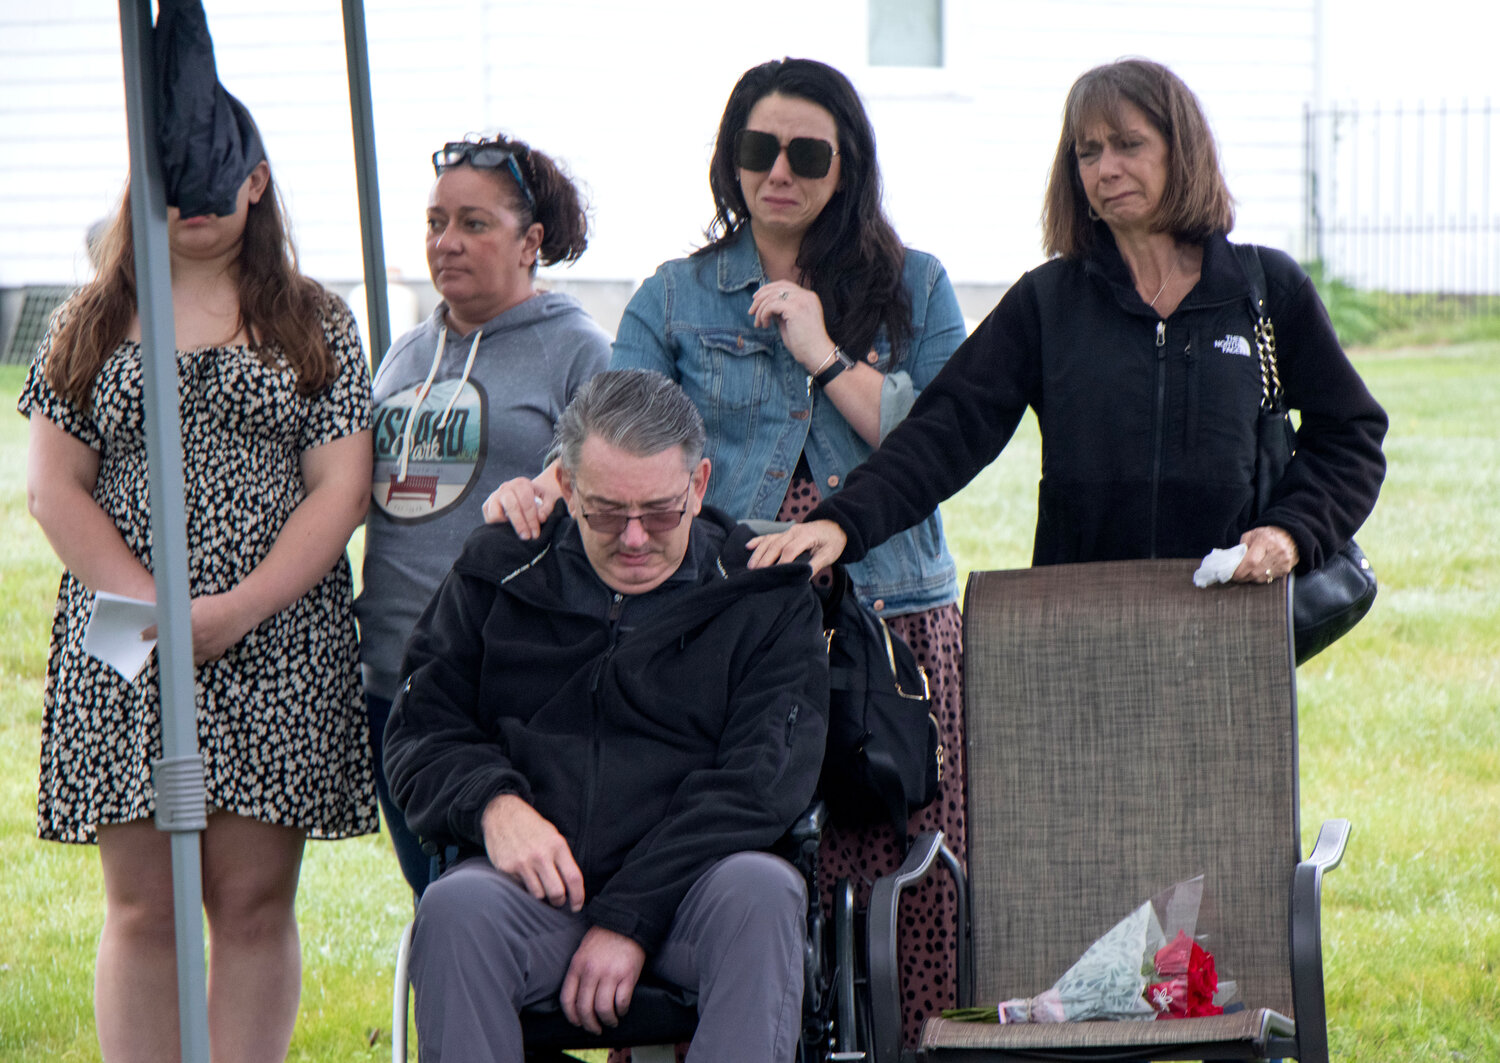 Jeffrey Sias is comforted by his daughter, Amanda Spear-Purchase (standing, second from right) and his wife, Annemarie Sias (right), during the vigil. The Siases lost their son, Samuel Elijah Sias, after he jumped from the Mt. Hope Bridge on Dec. 2, 2022. He was 26. At left are Meredith Kidd (partly obscured) and her mother, Kristen Kidd.